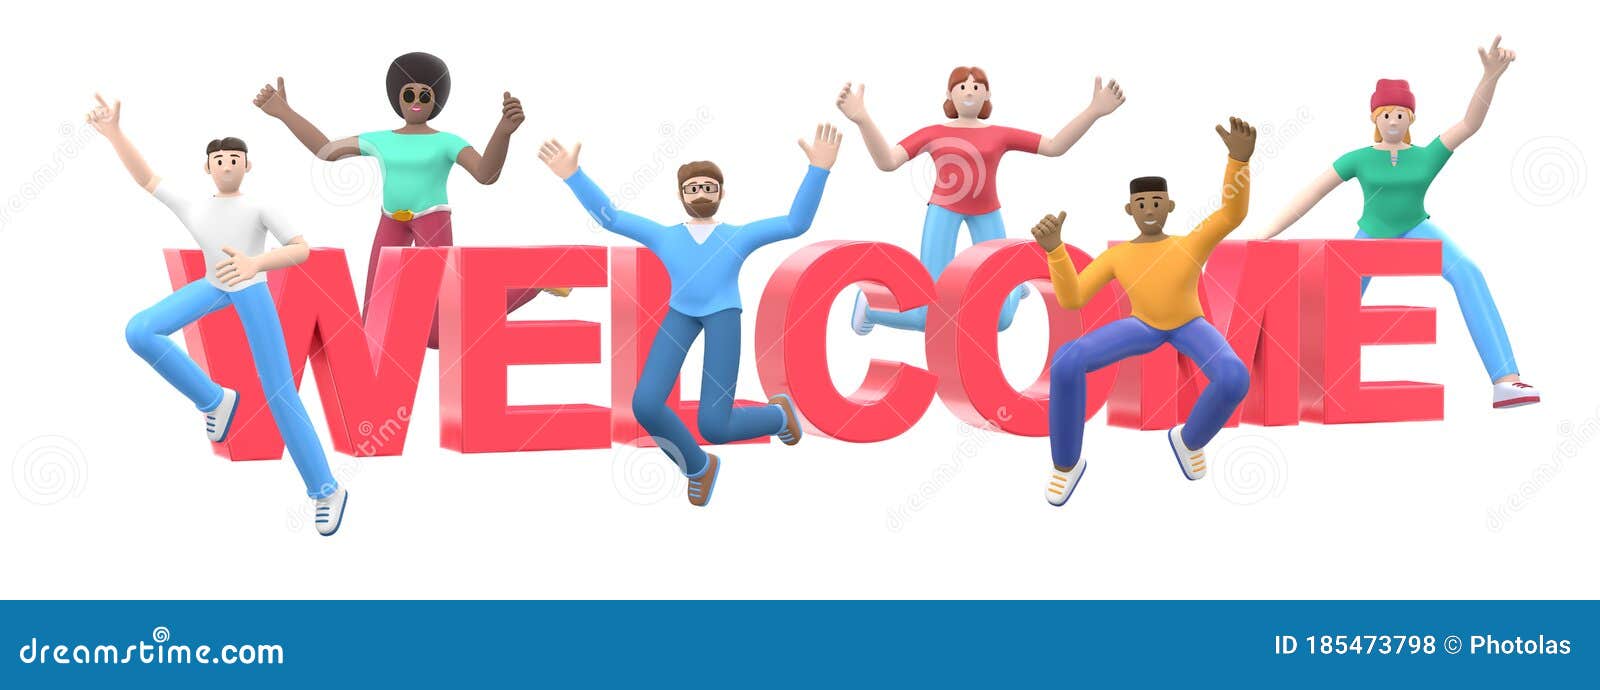 The Word Welcome on a White Background. Group of Young ...